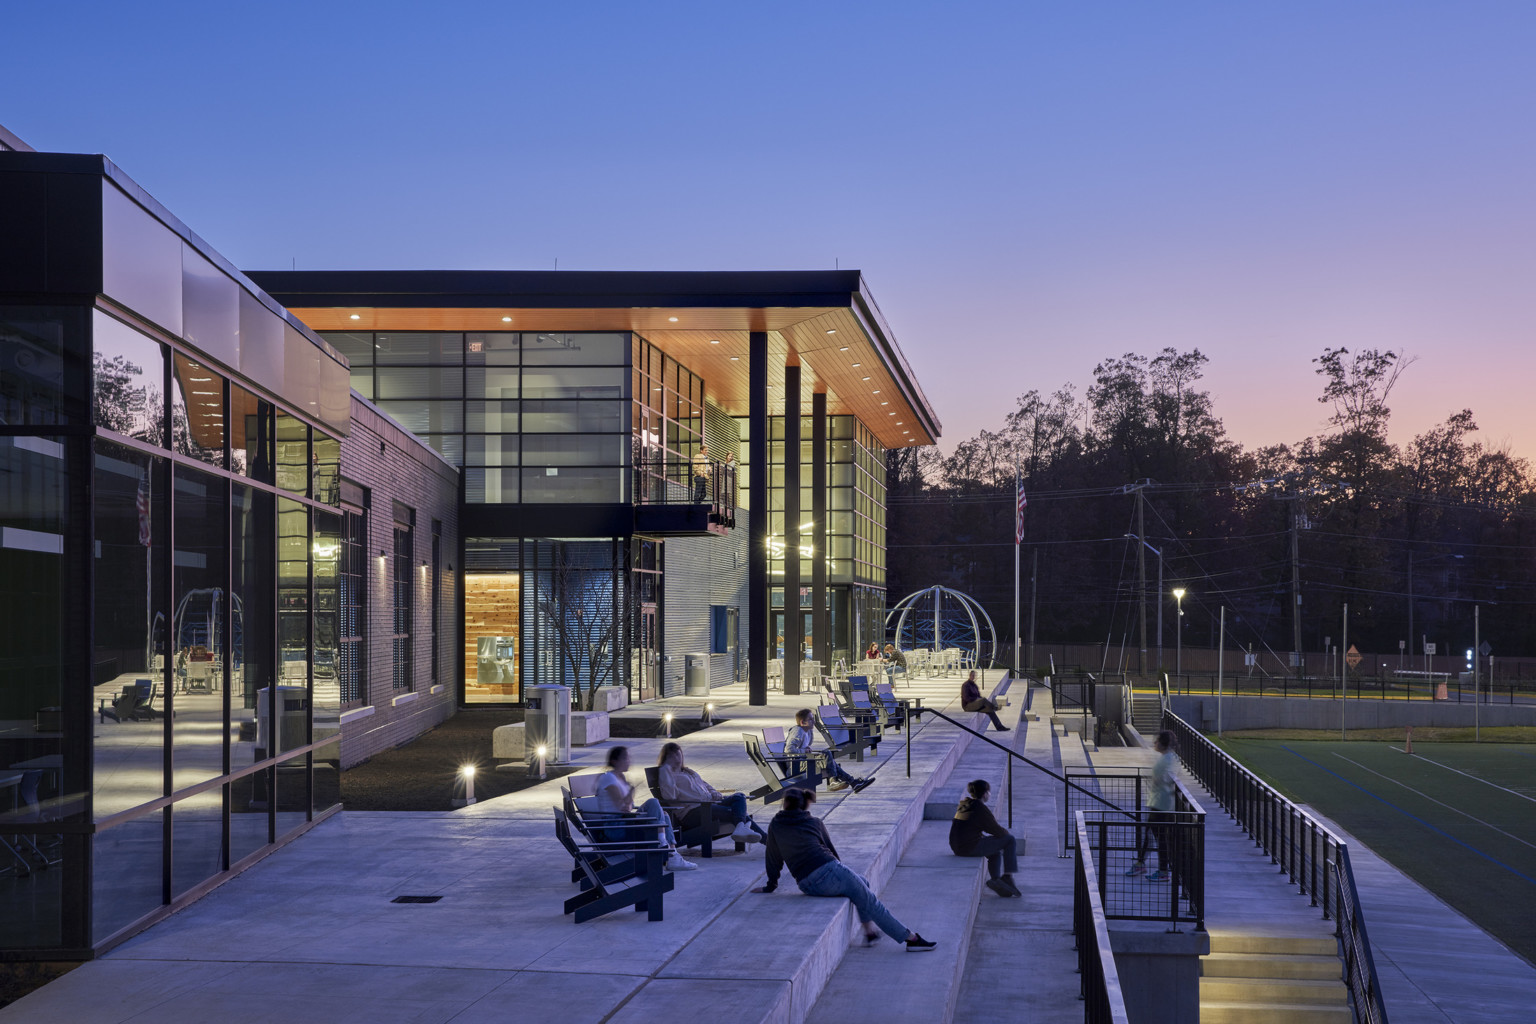 students relaxing on cement patio outside a modern school with glass walls, wood overhang held up with metal columns